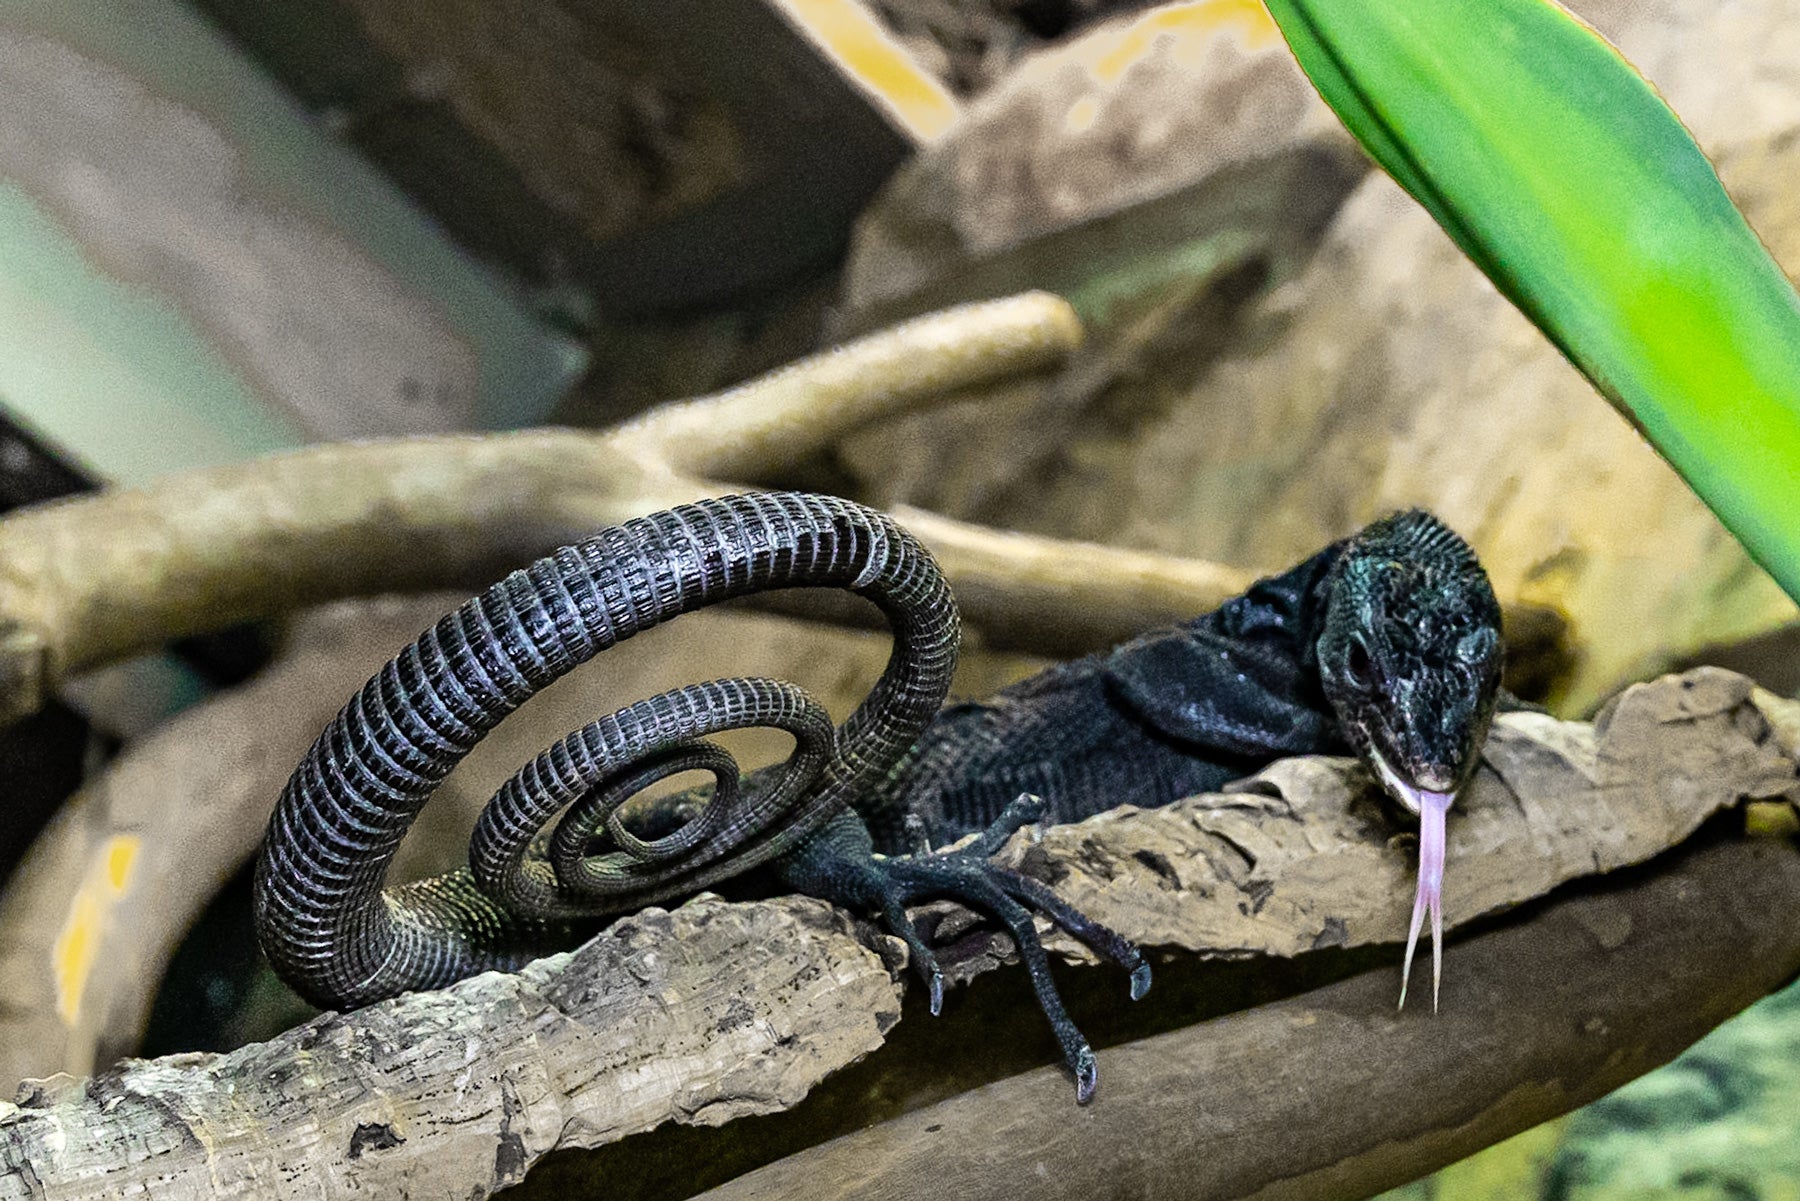 A black tree monitor (lizard) with a long, coiled tail, elongated body, long toes and a forked tongue